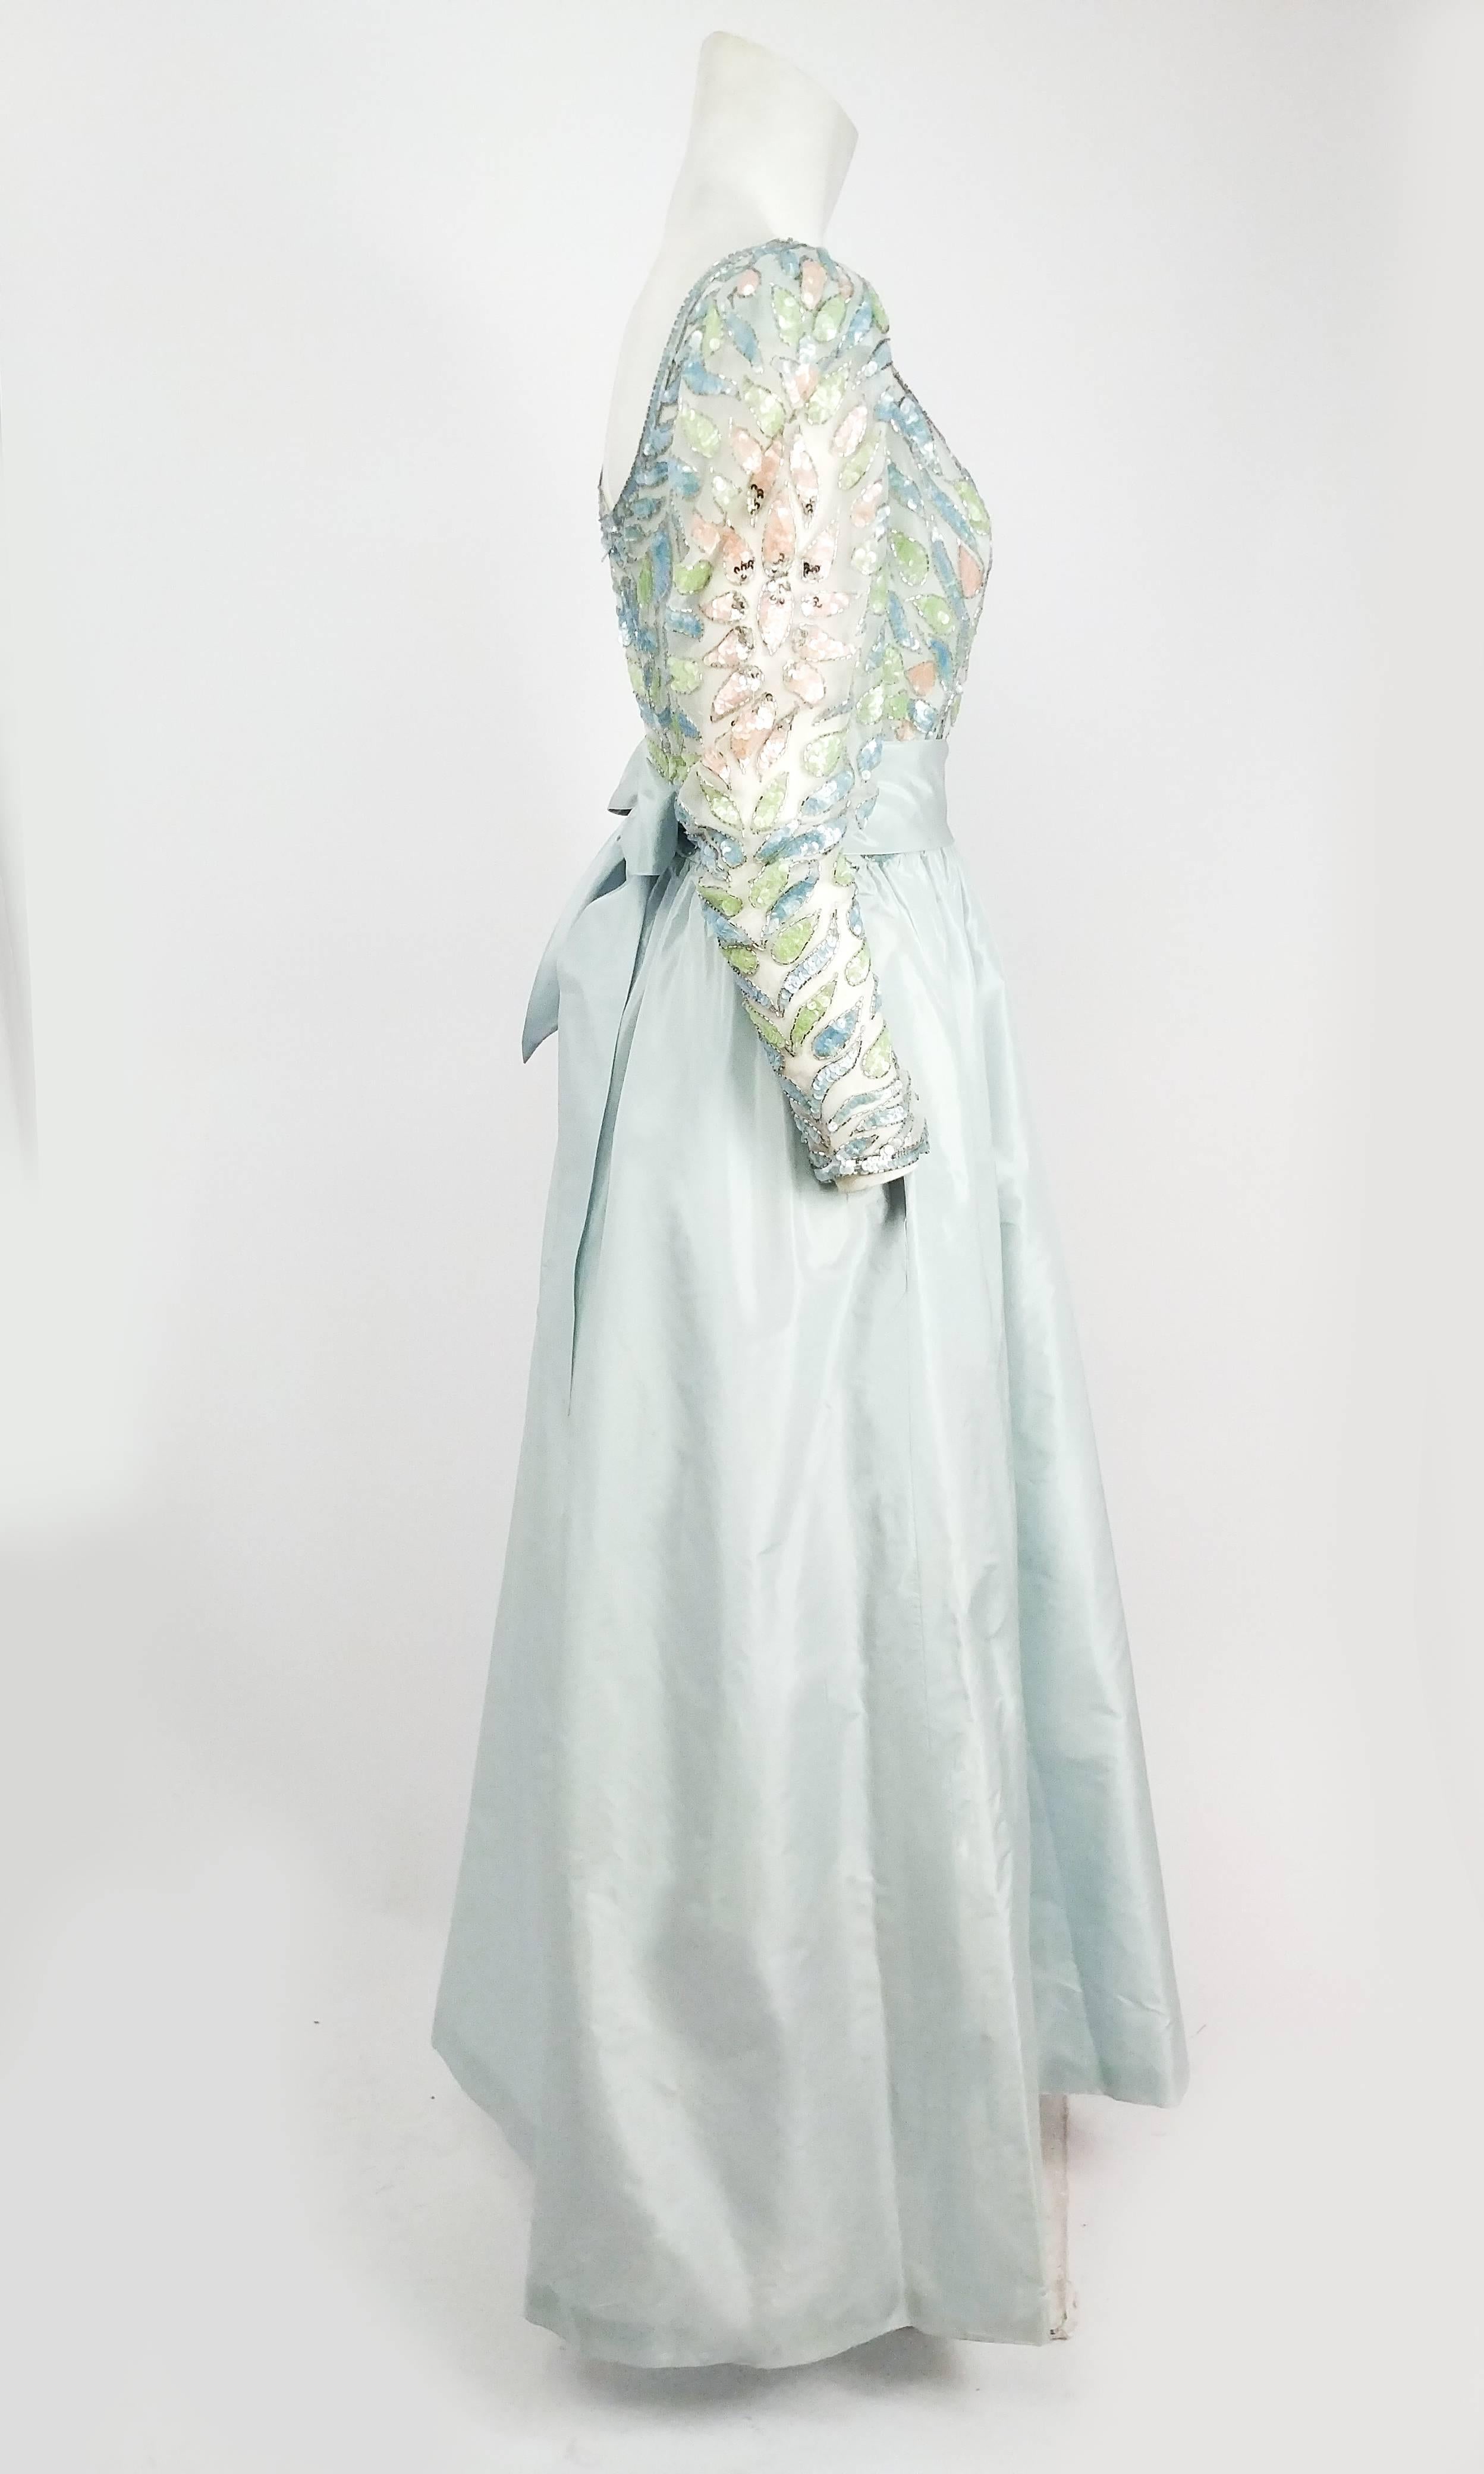 1960s Lillie Ruban Pastel Blue Beaded Silk Gown. Pink, green, and blue sequins and silver glass beads embellish the silk organza bodice, which has slightly puffed sleeves and low scooping neckline. Light blue taffeta skirt and separate waist sash.